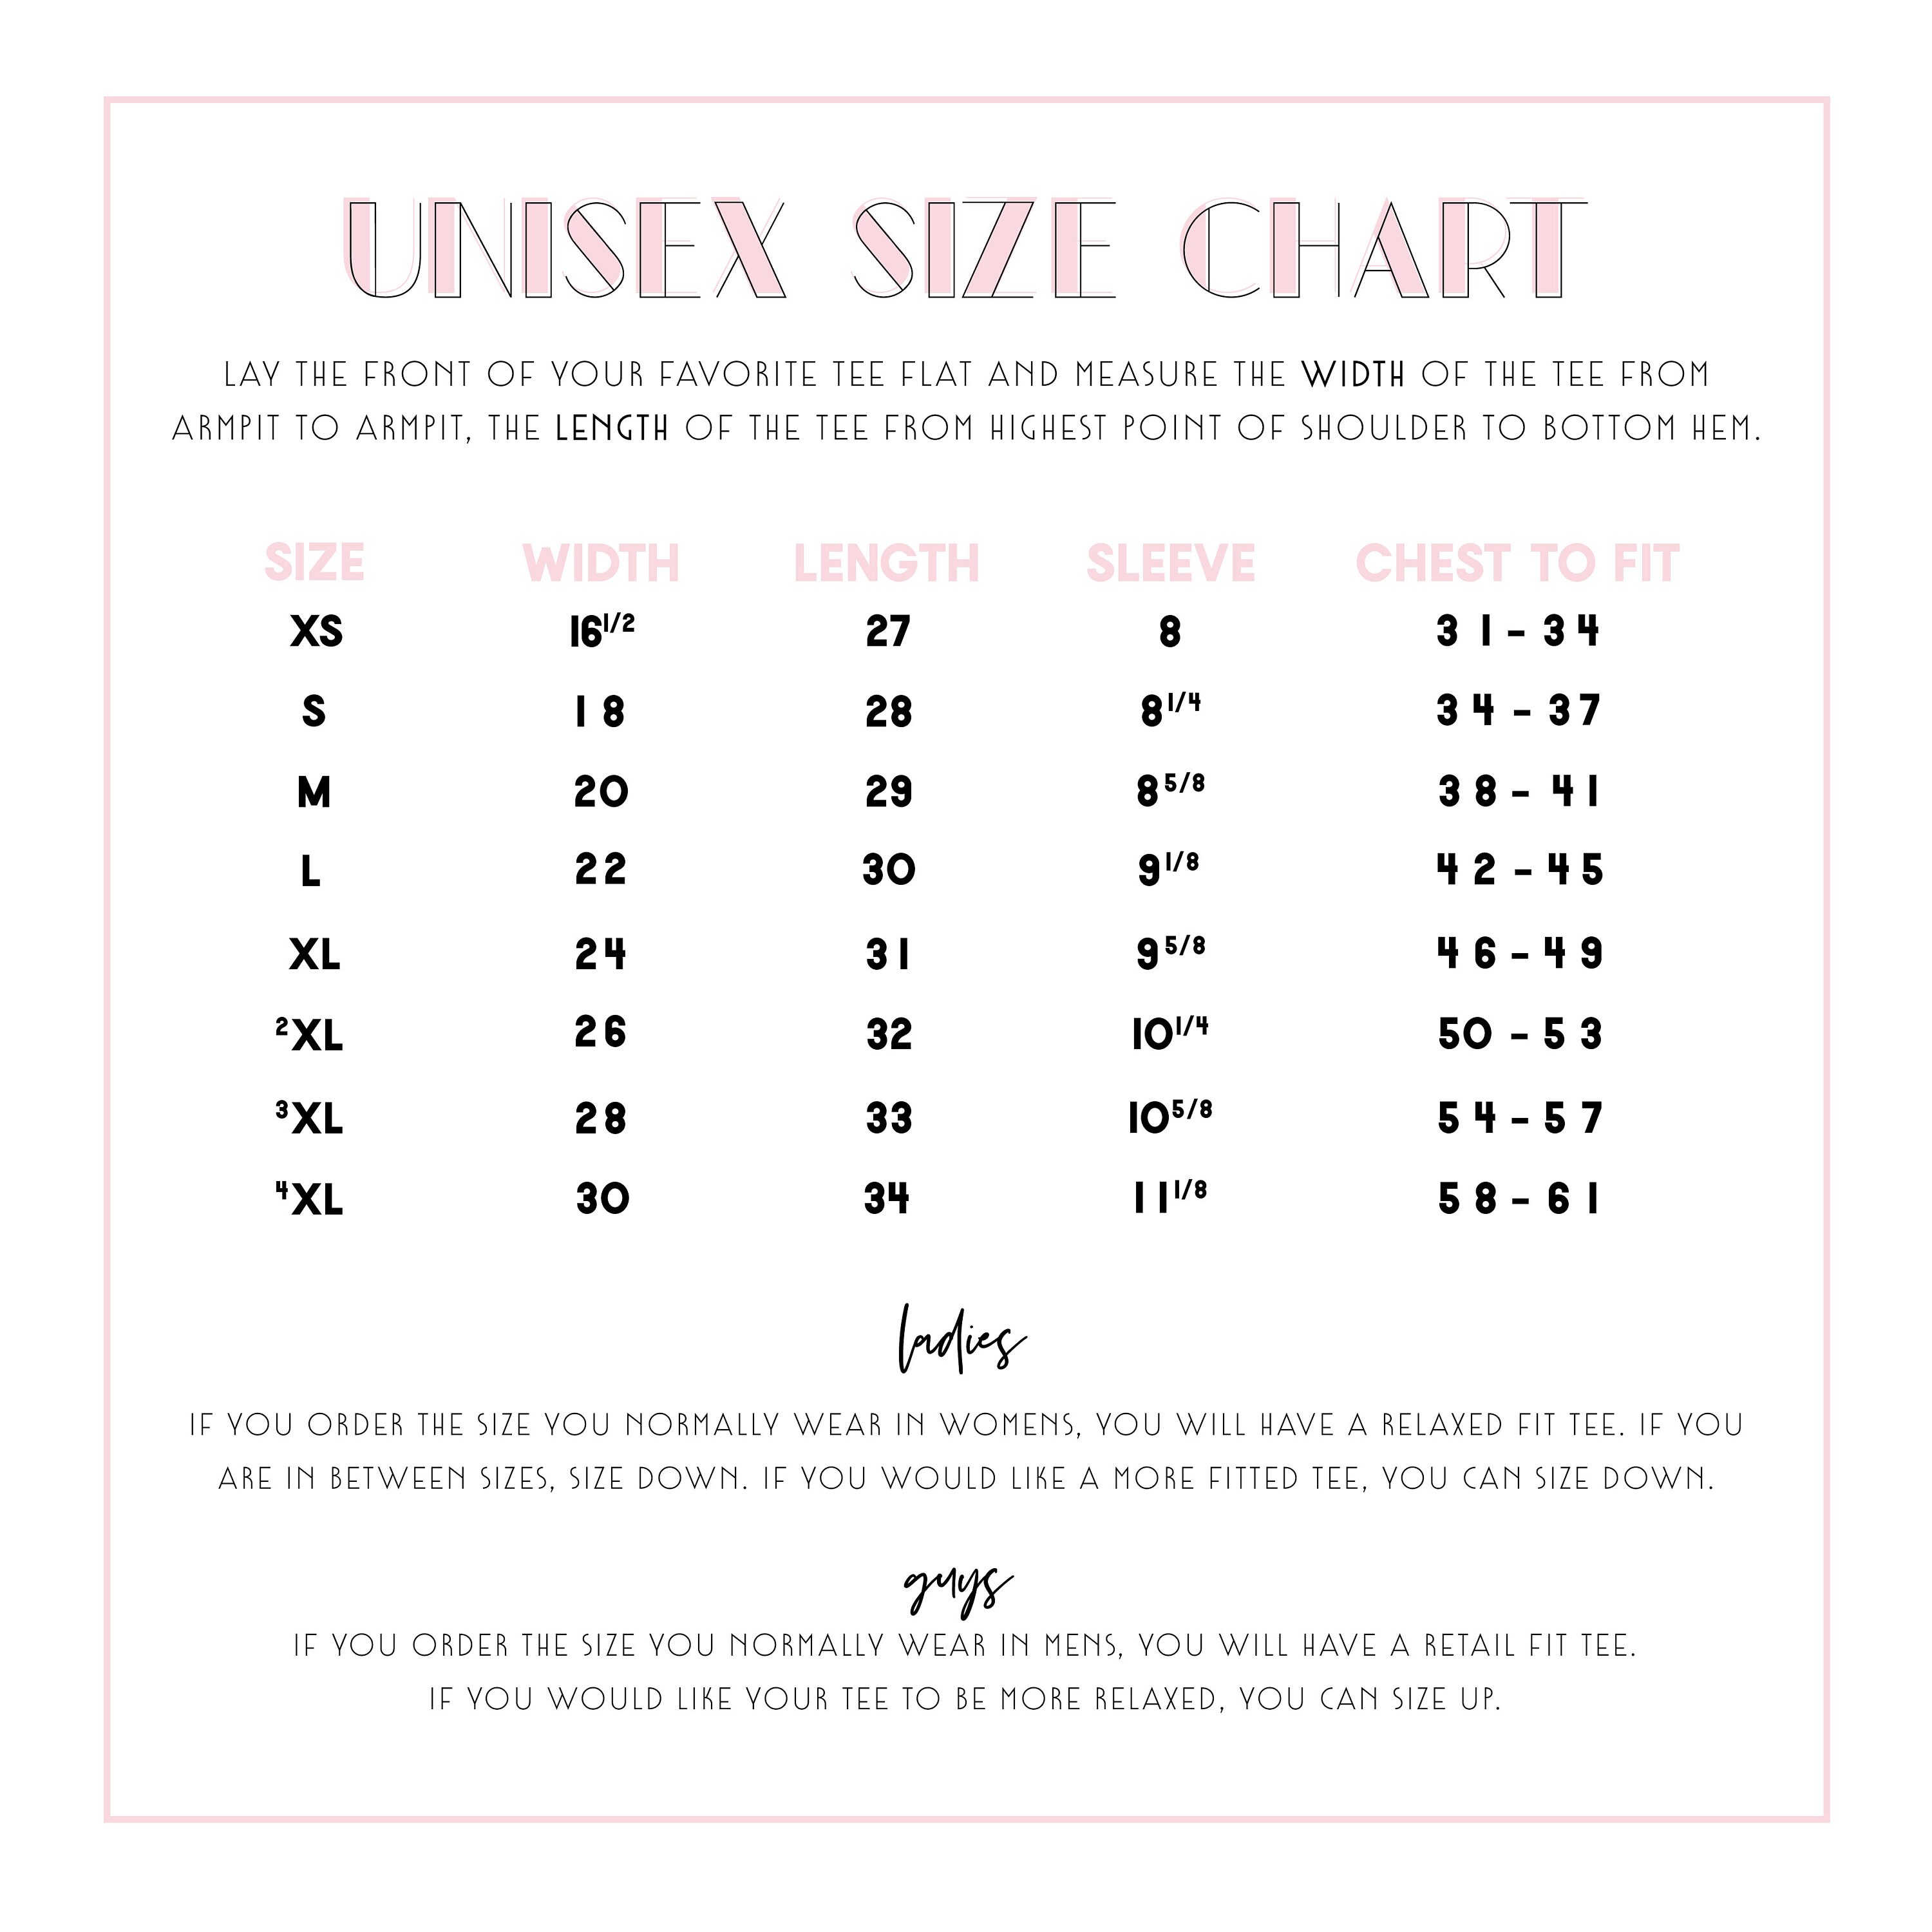 LTA Youth size guide